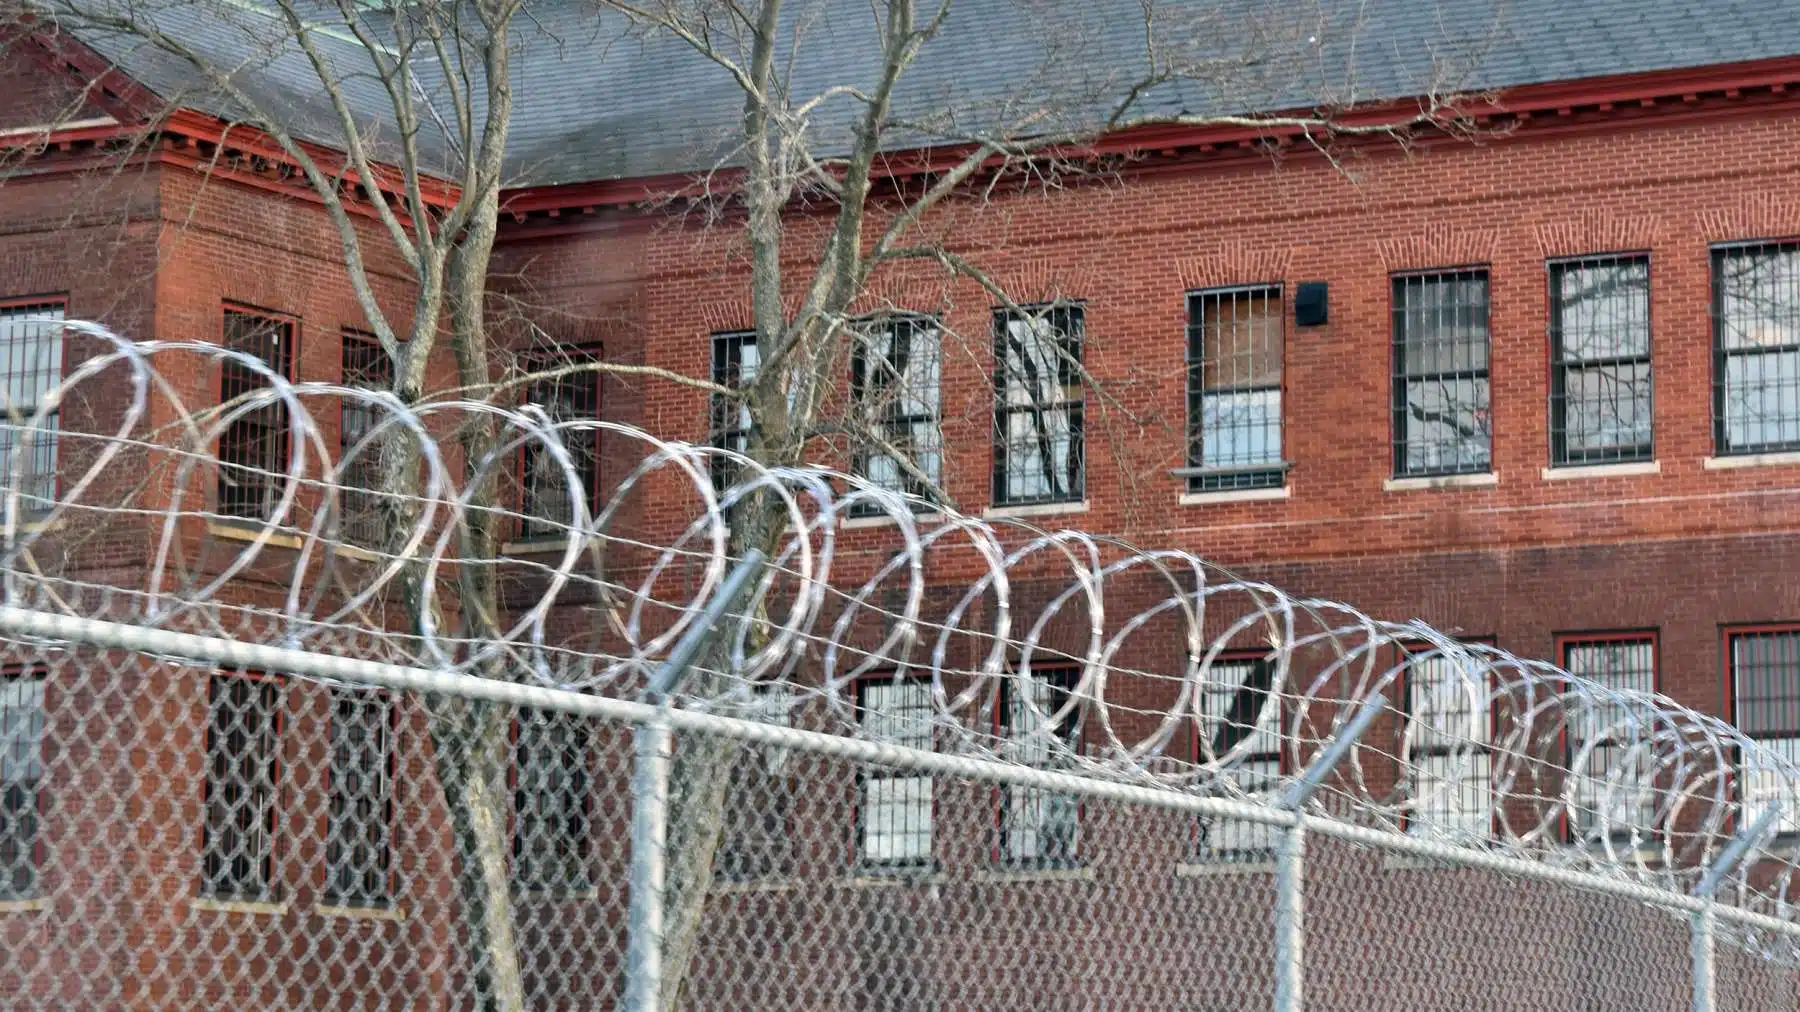 Rhode Island News: The Juvenile Offender Parole Act would allow a second chance at life